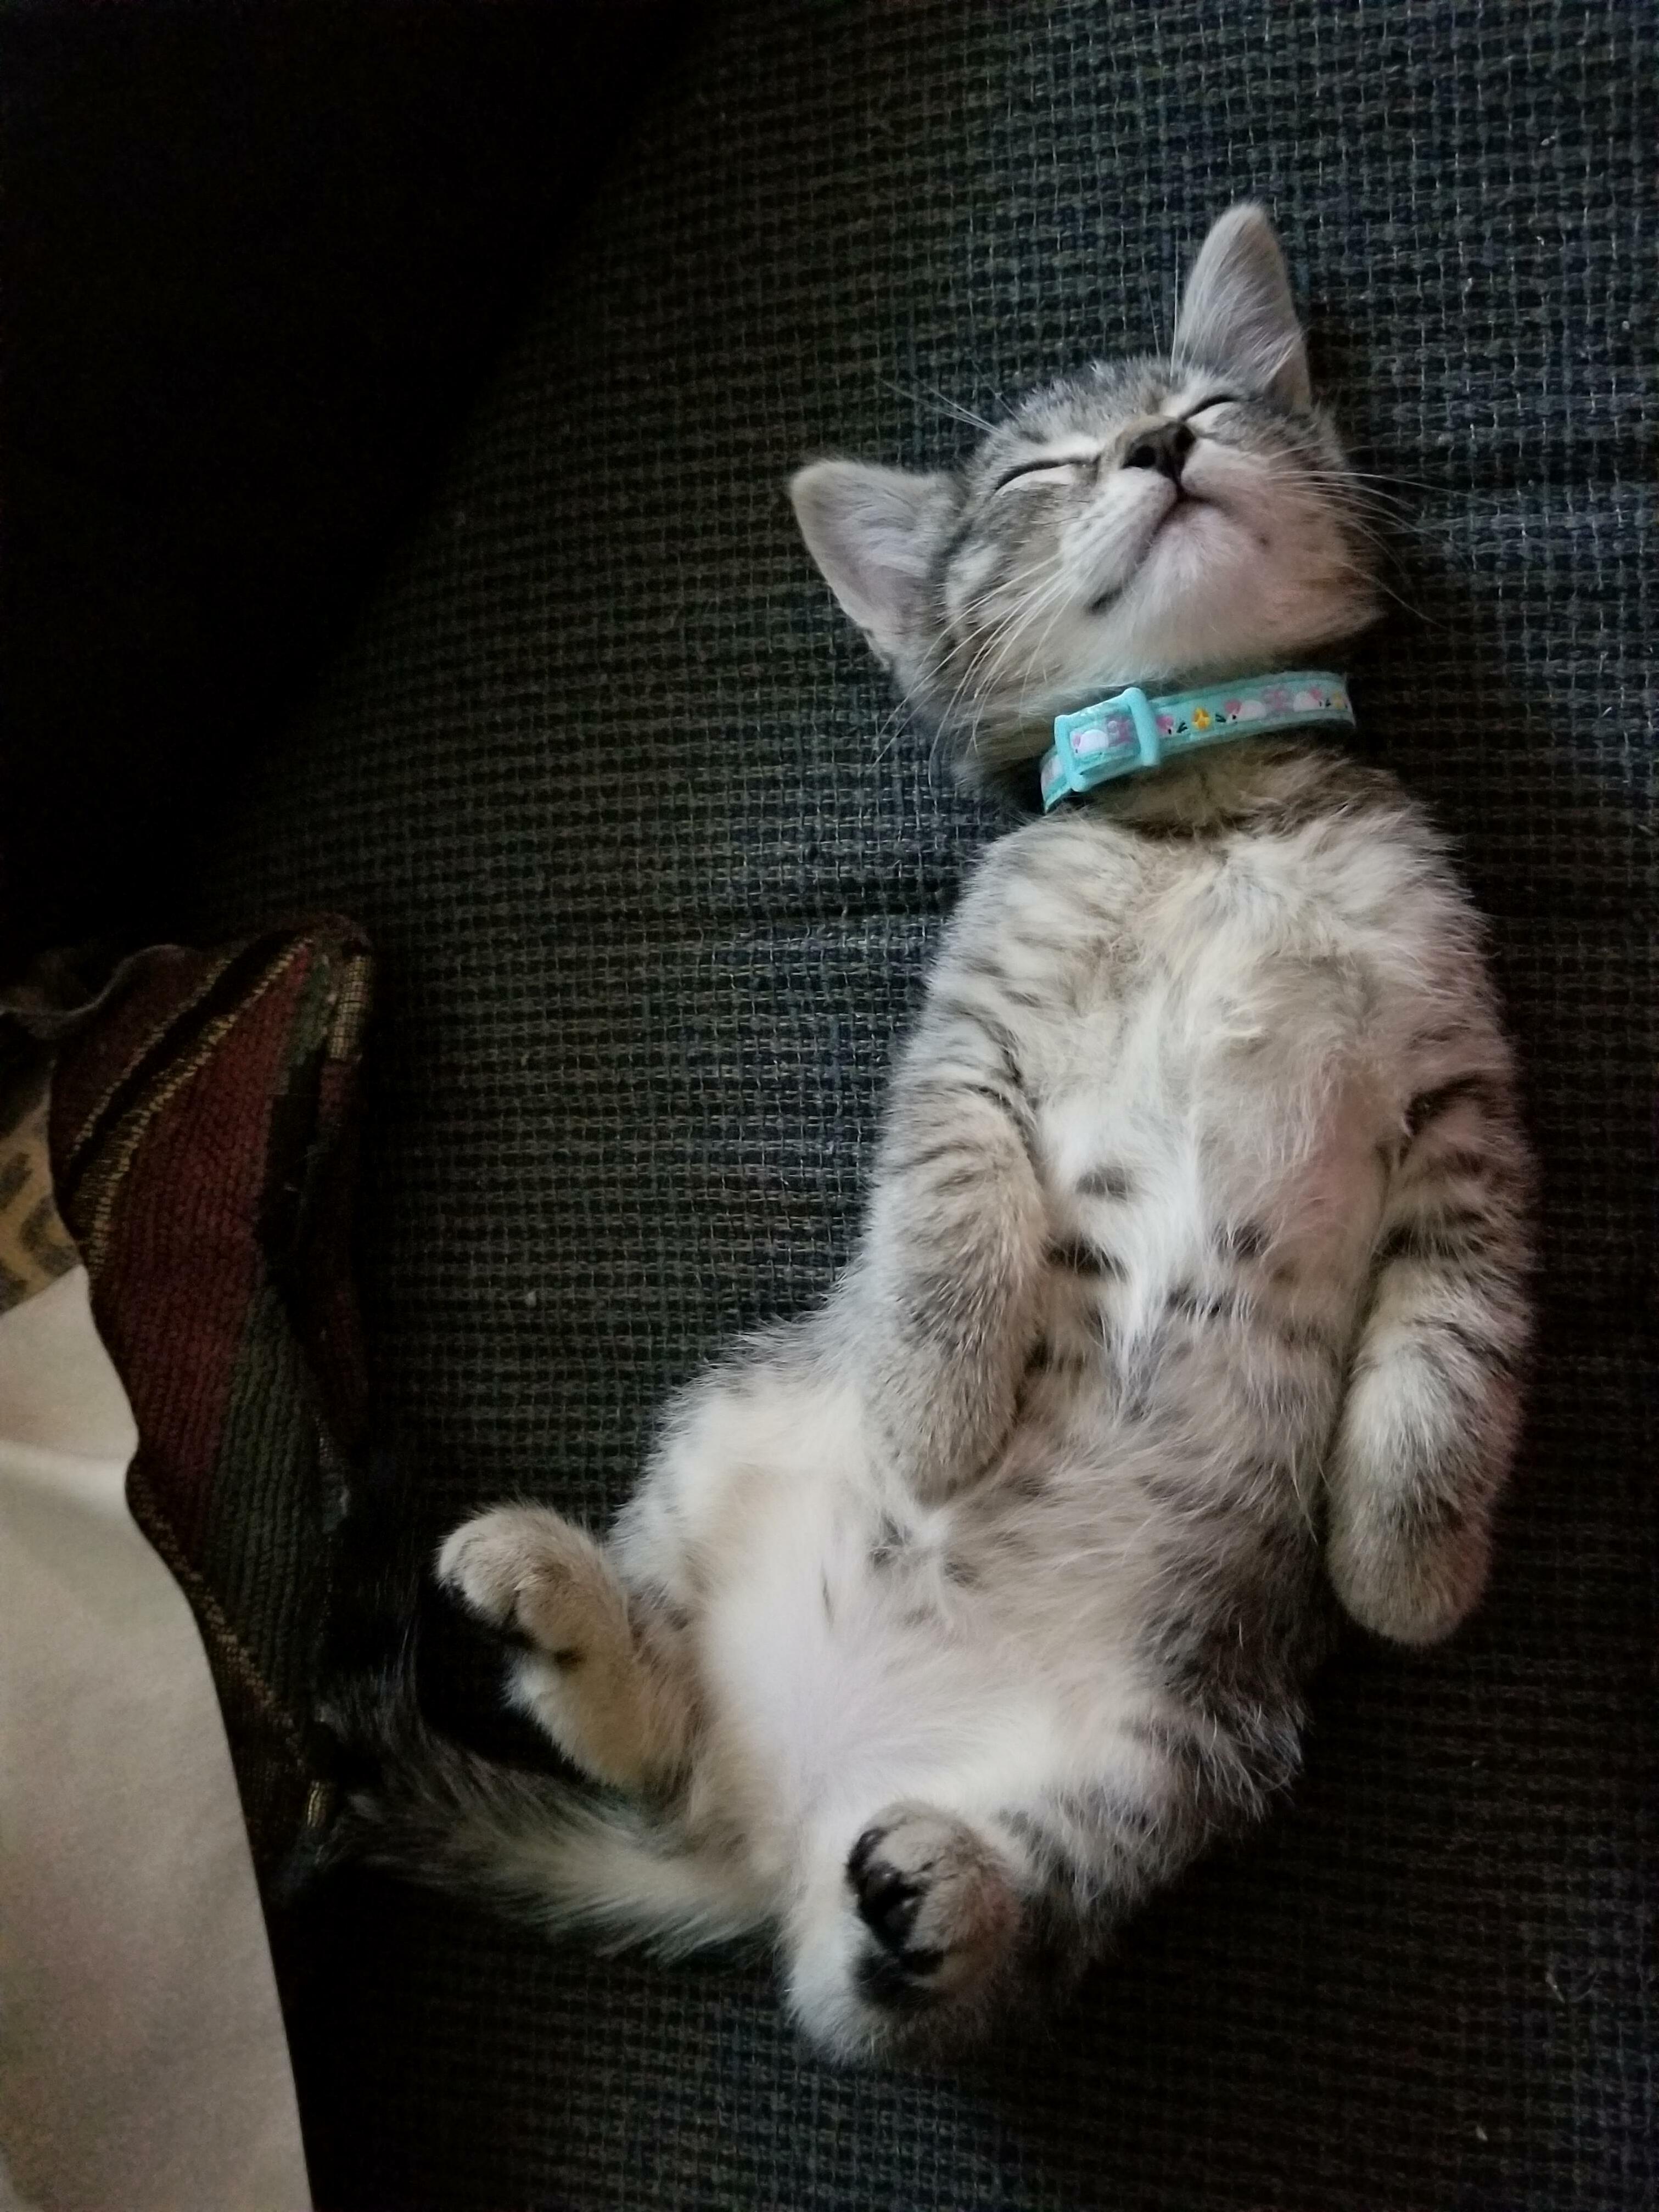 Minerva is exhausted after her first day at home